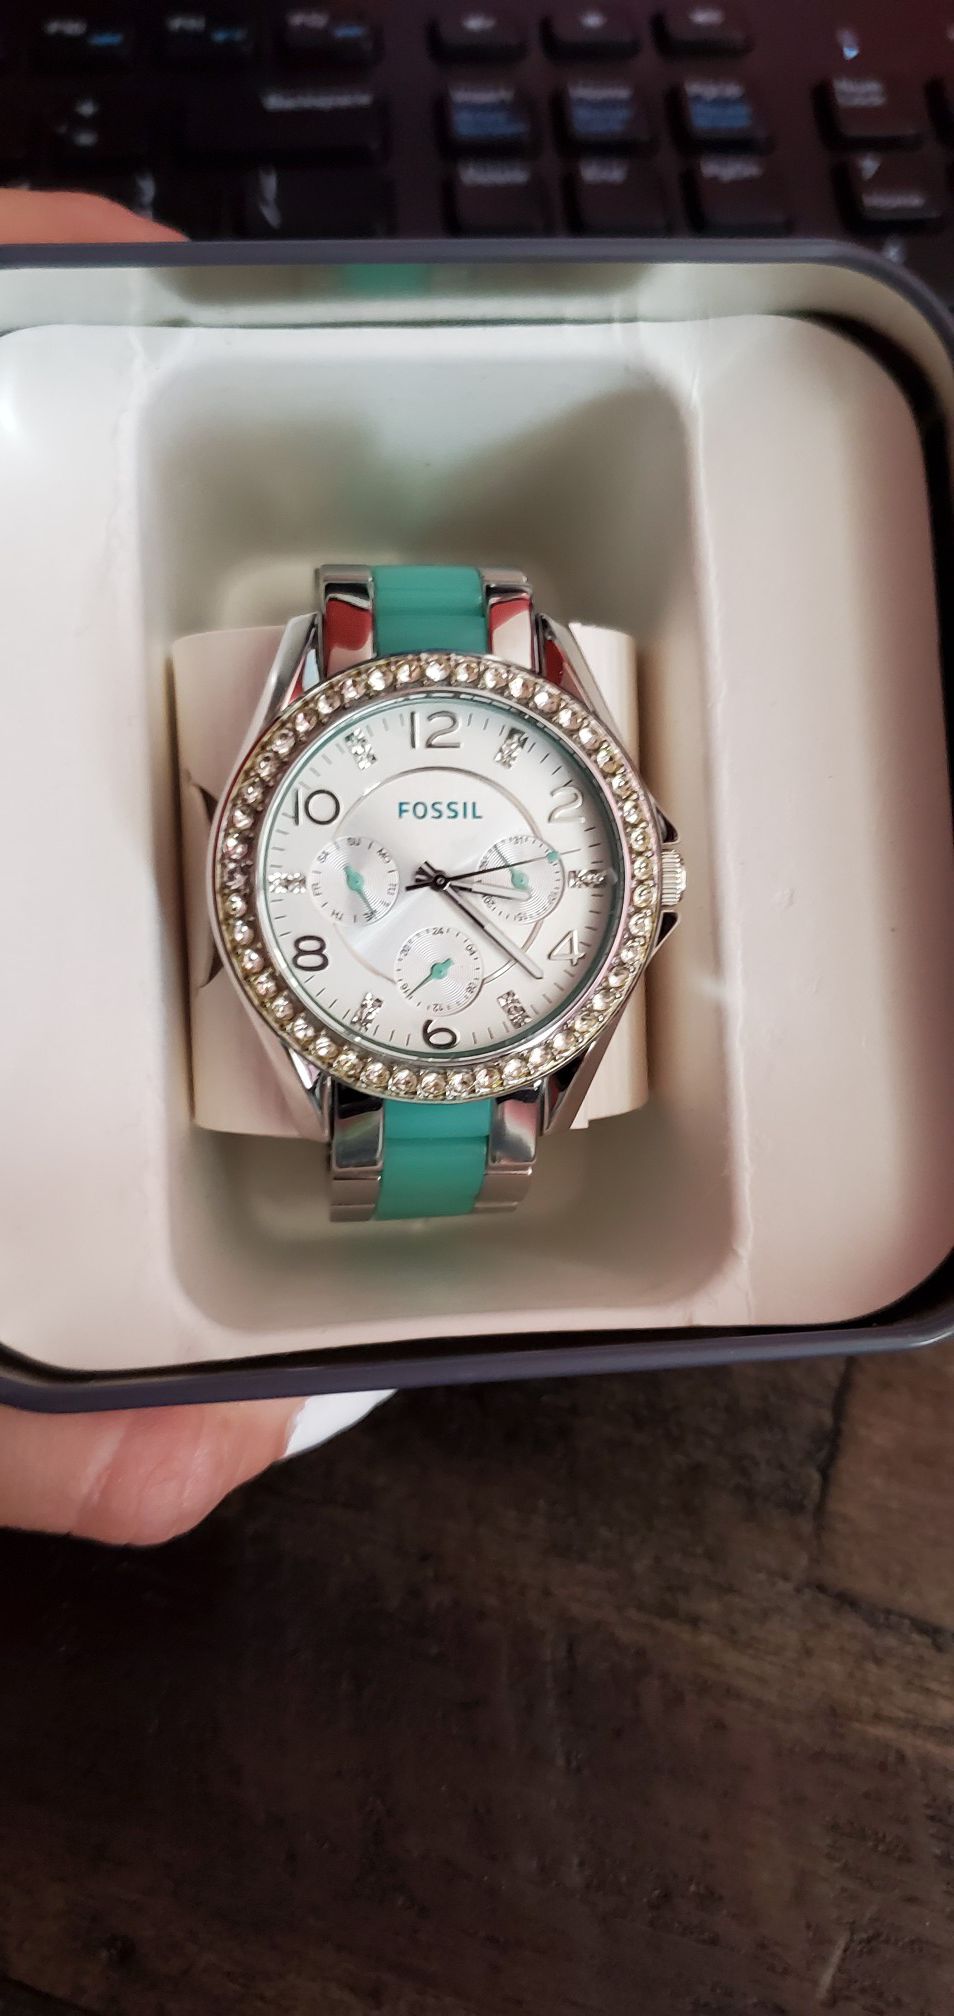 Fossil turquoise watch. Never used.